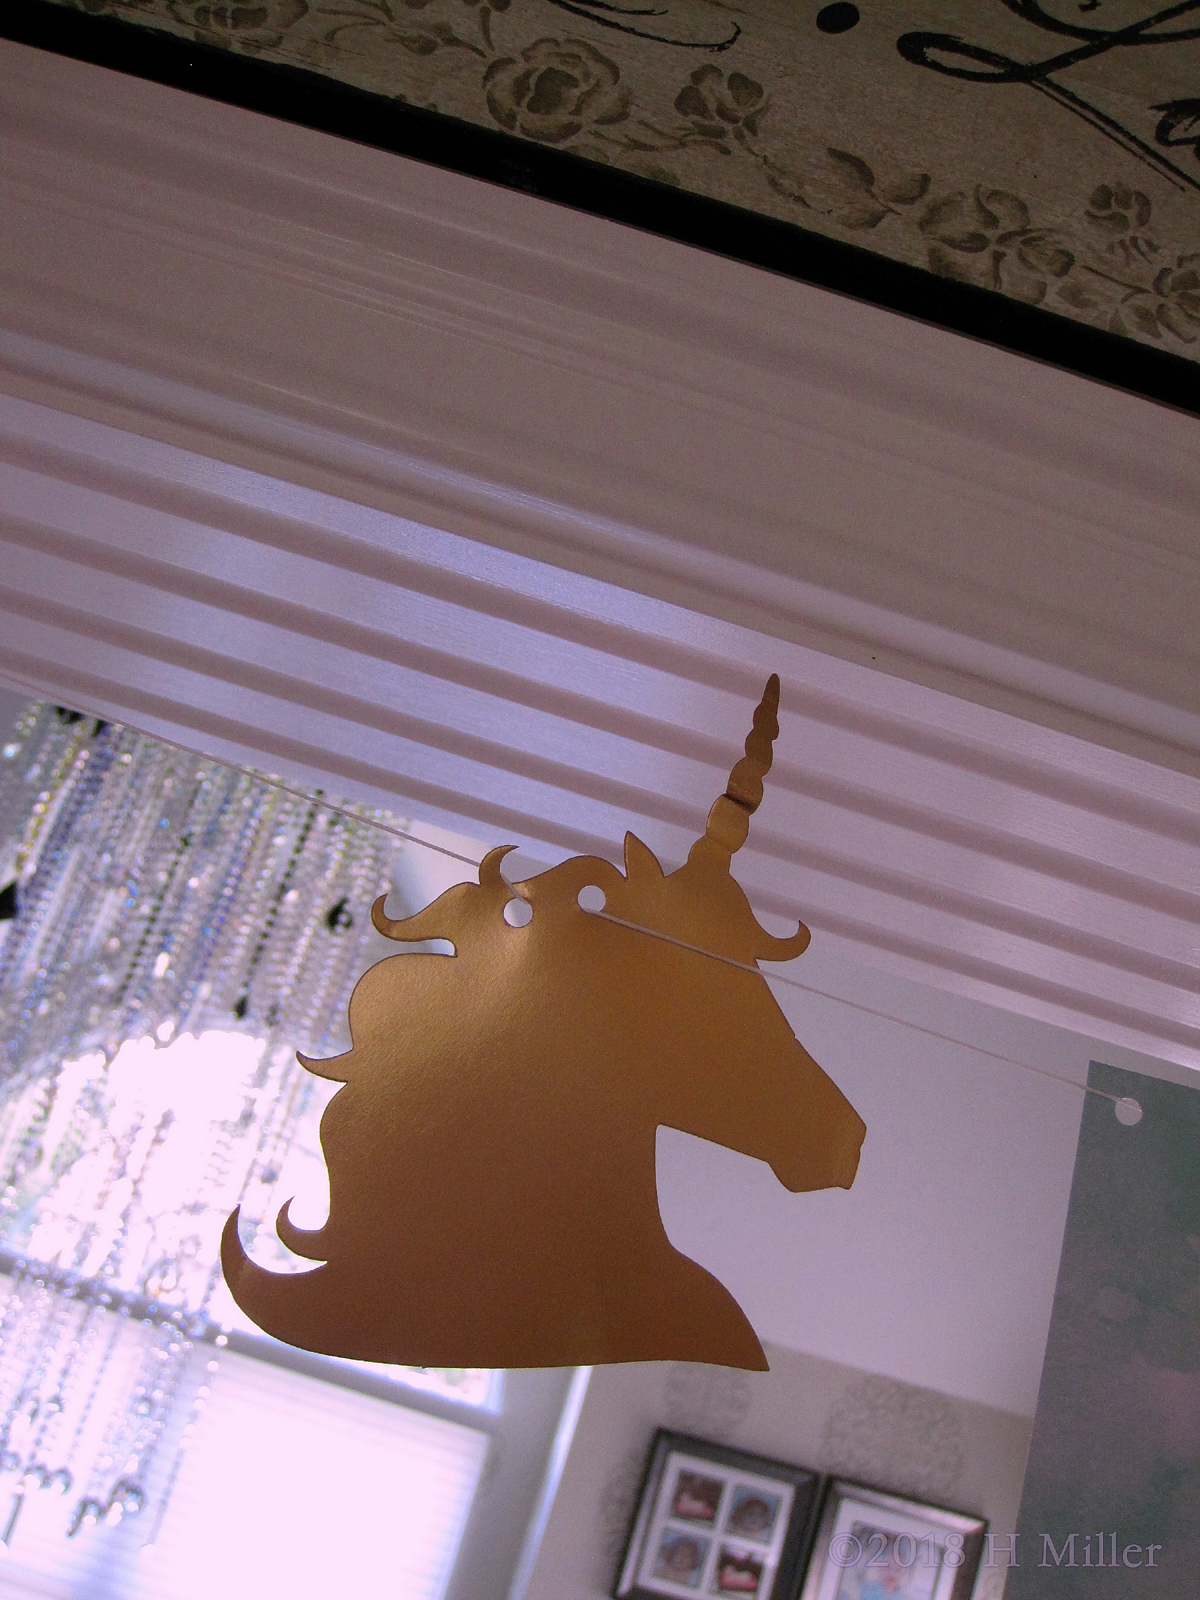 Big Golden Unicorn Decoration Hanging From The Ceiling, Looks Great! 